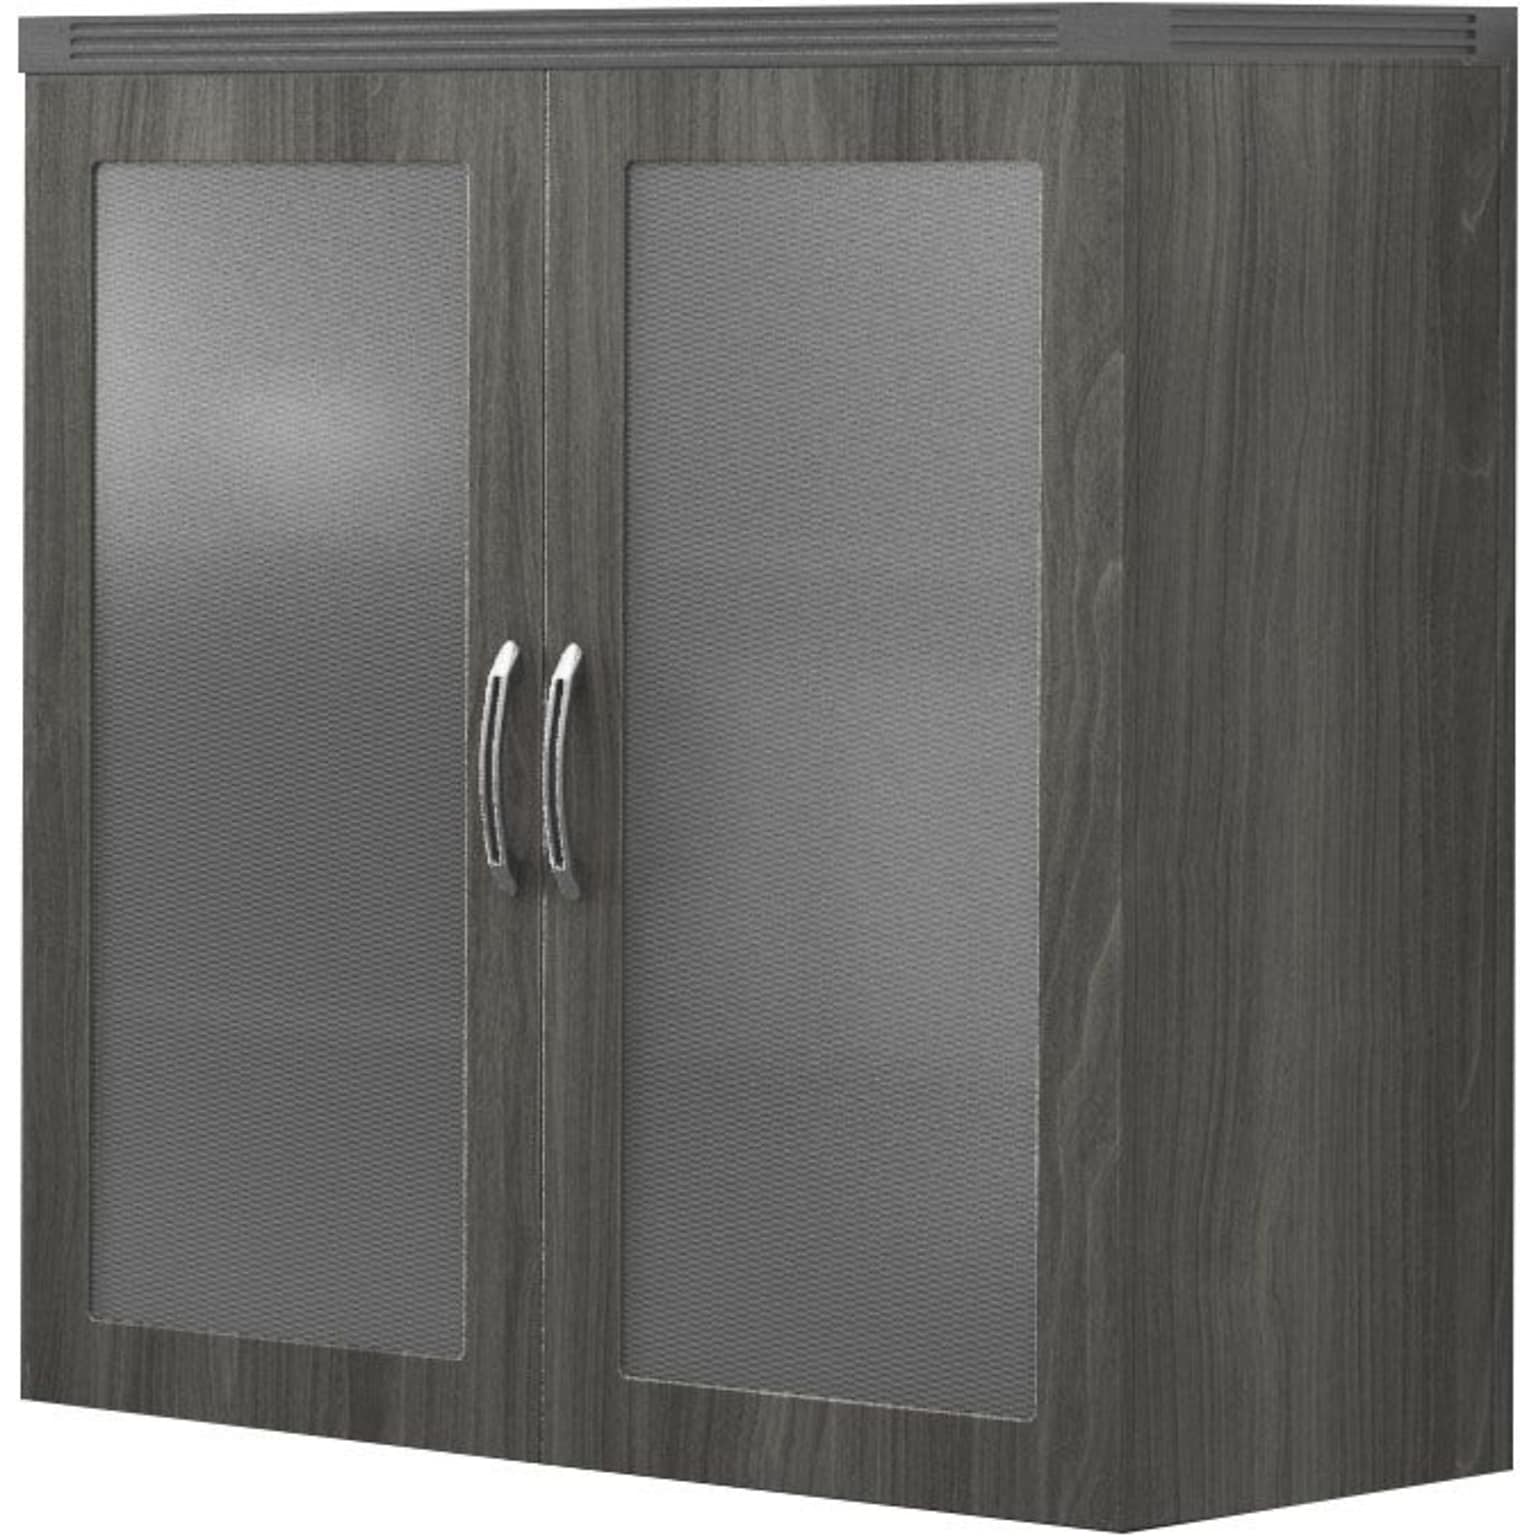 Safco Aberdeen Glass Display Cabinet, 39 1/4H x 36W, Gray Steel (AGDCLGS)